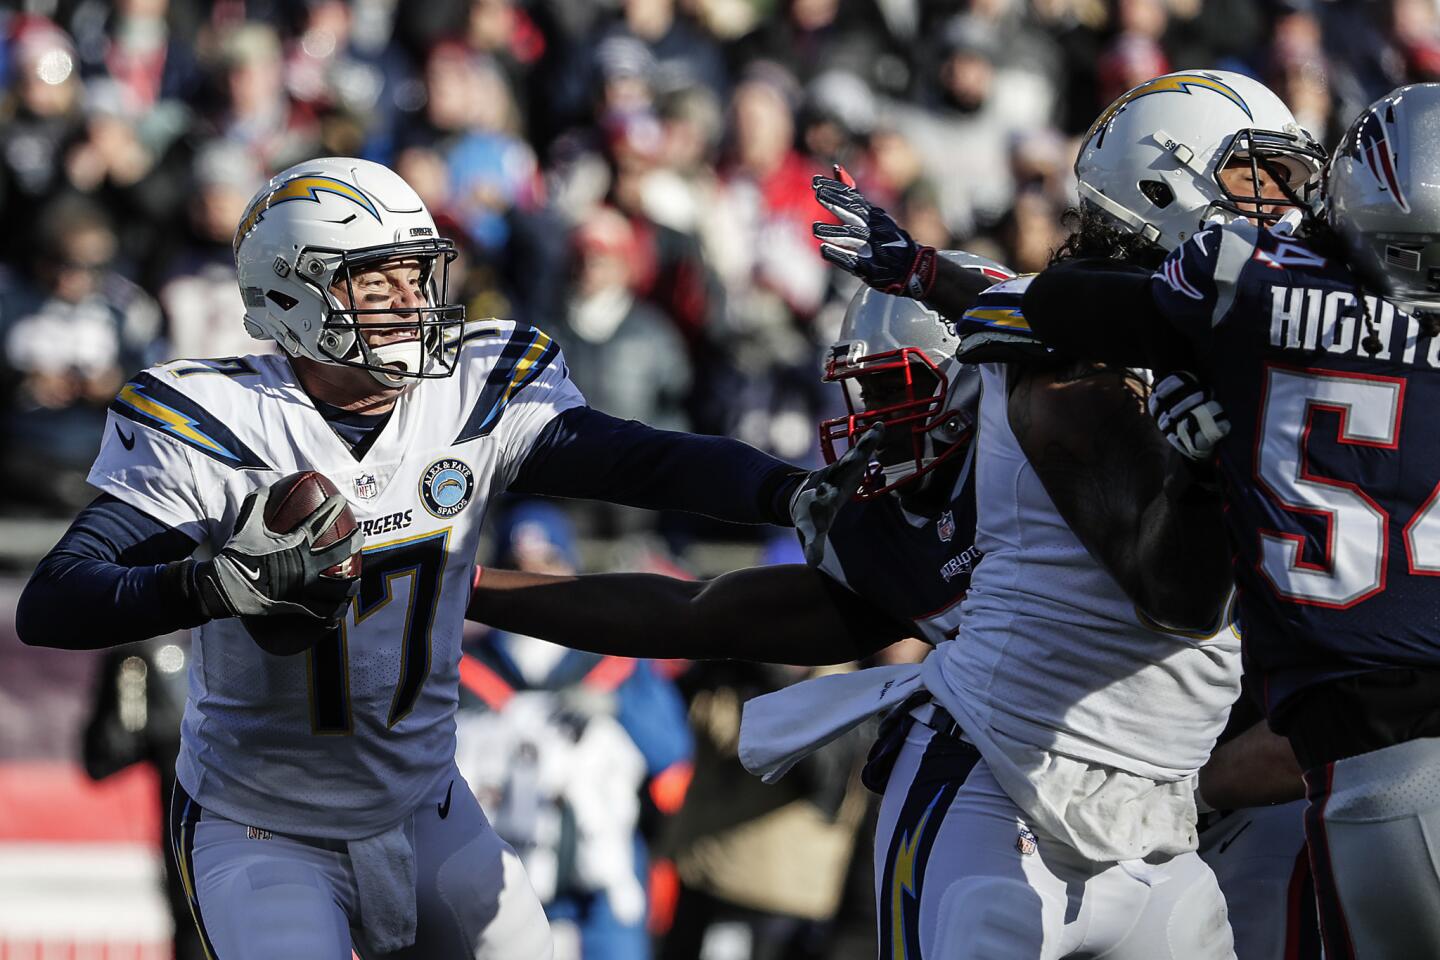 Chargers quarterback Philip Rivers struggles to escape pressure from New England Patriots defenders during first half action in the NFL AFC Divisional Playoff at Gillette Stadium.